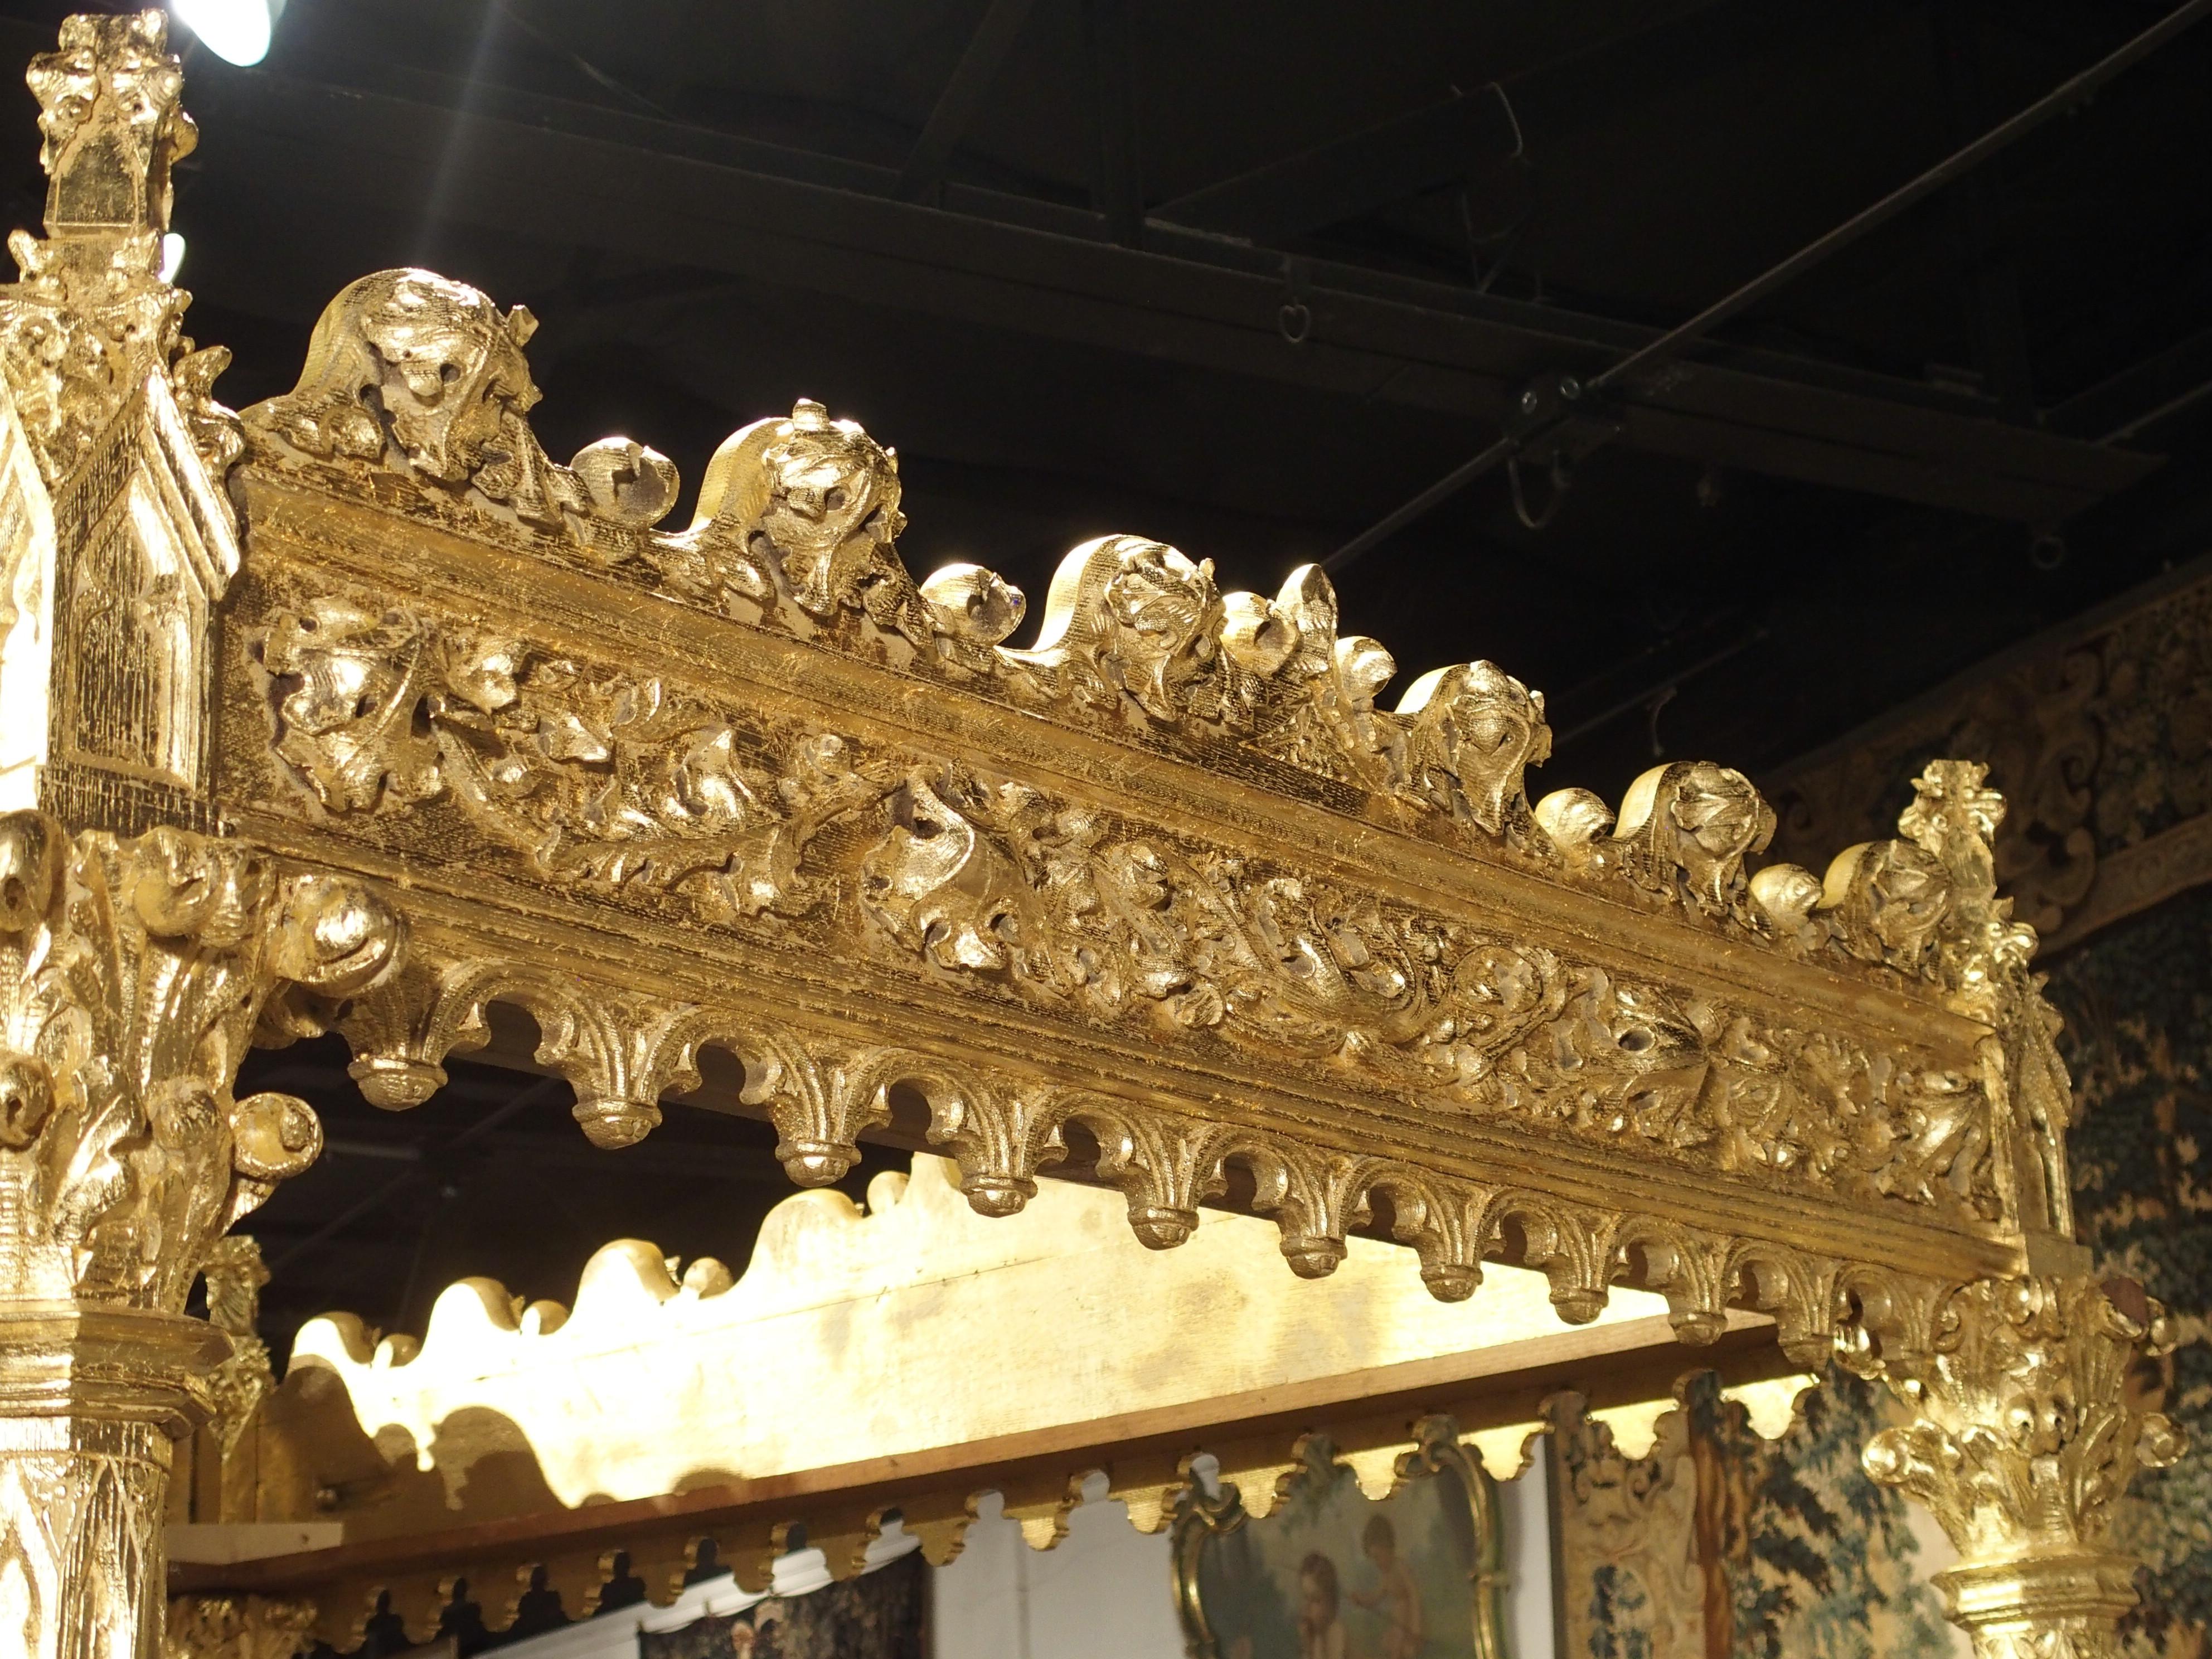 Magnificent Fully Carved Antique French Gothic Bed in 23.5-Karat Gold Leaf 10